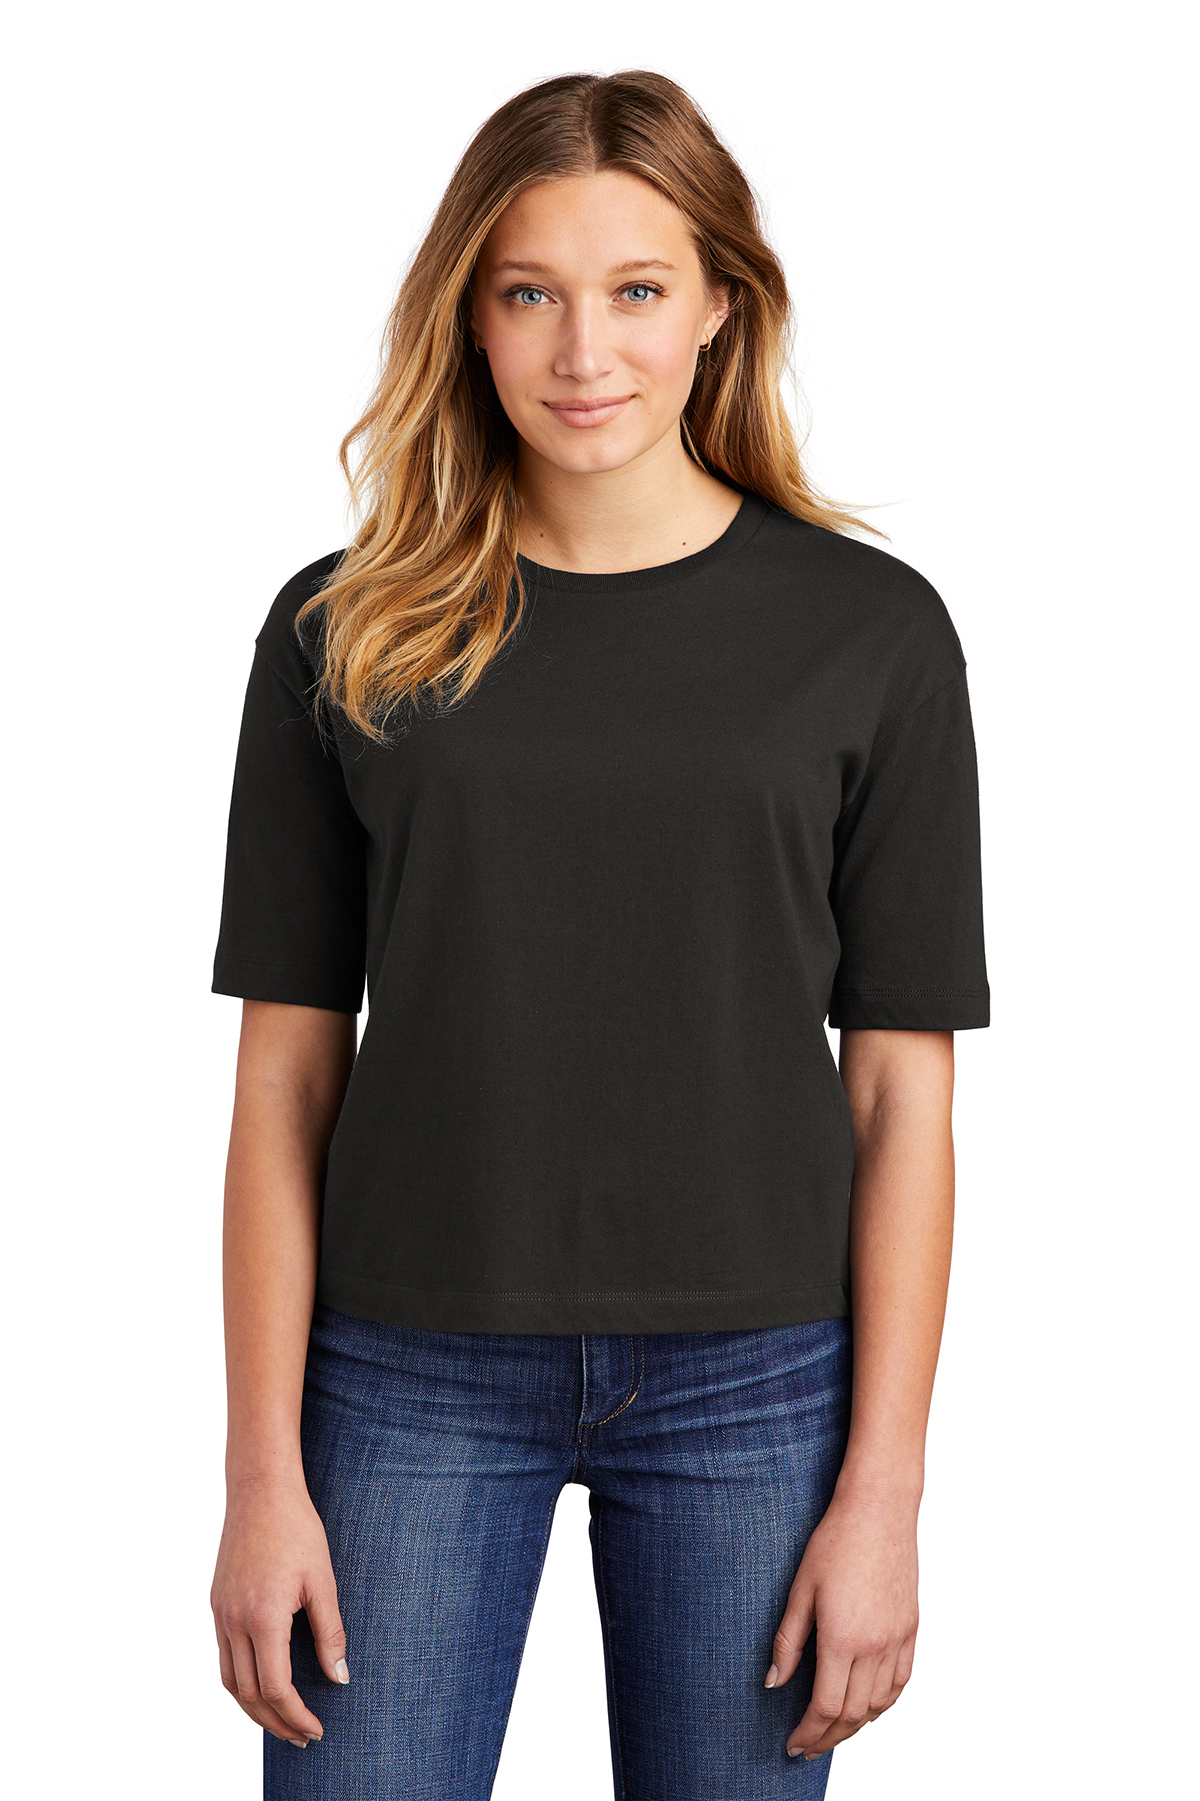 District Women's V.I.T. Boxy Tee | Product | SanMar